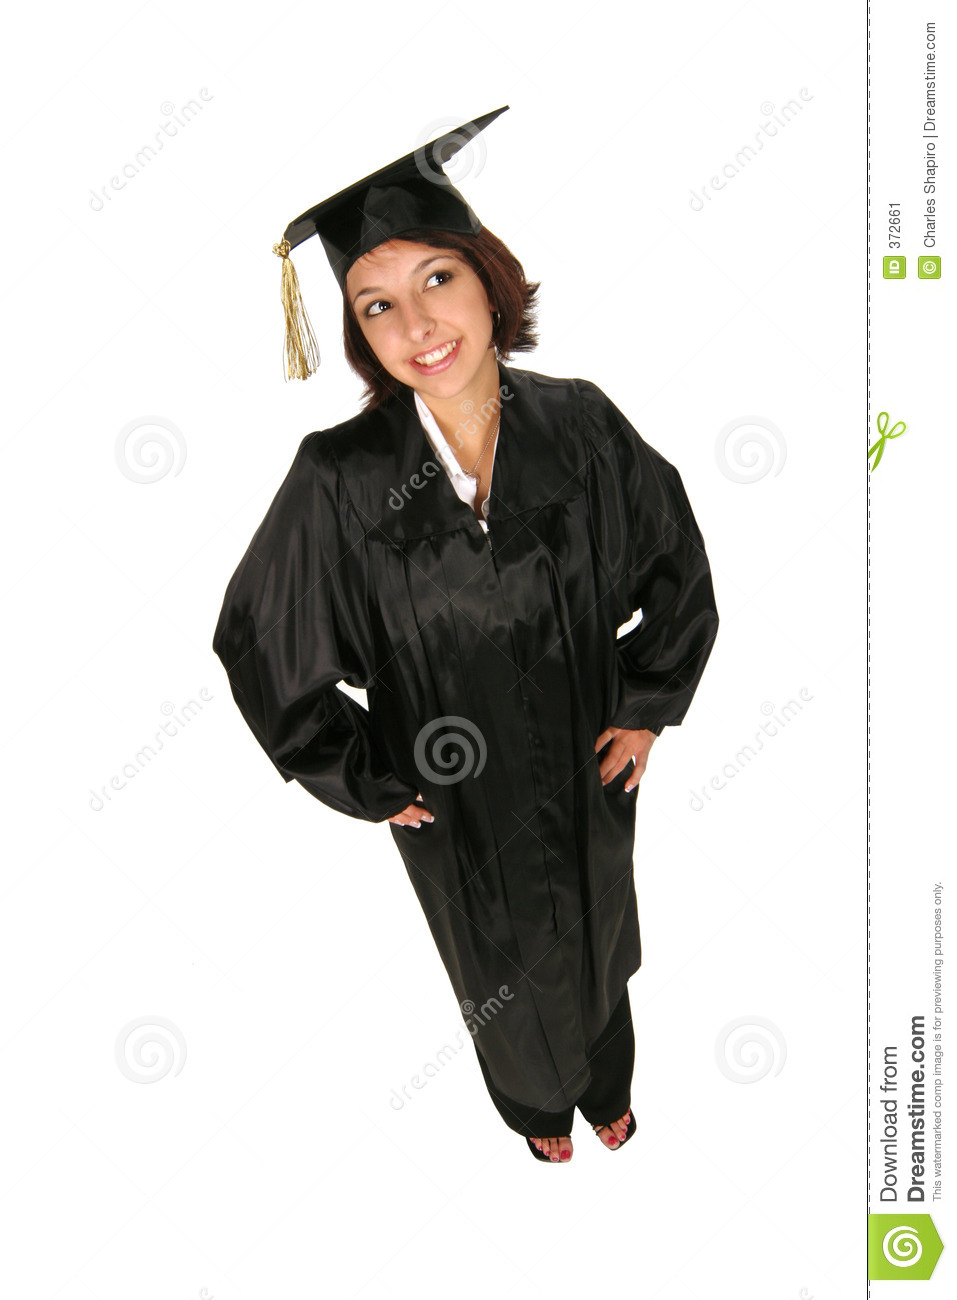 Girl in cap and gown